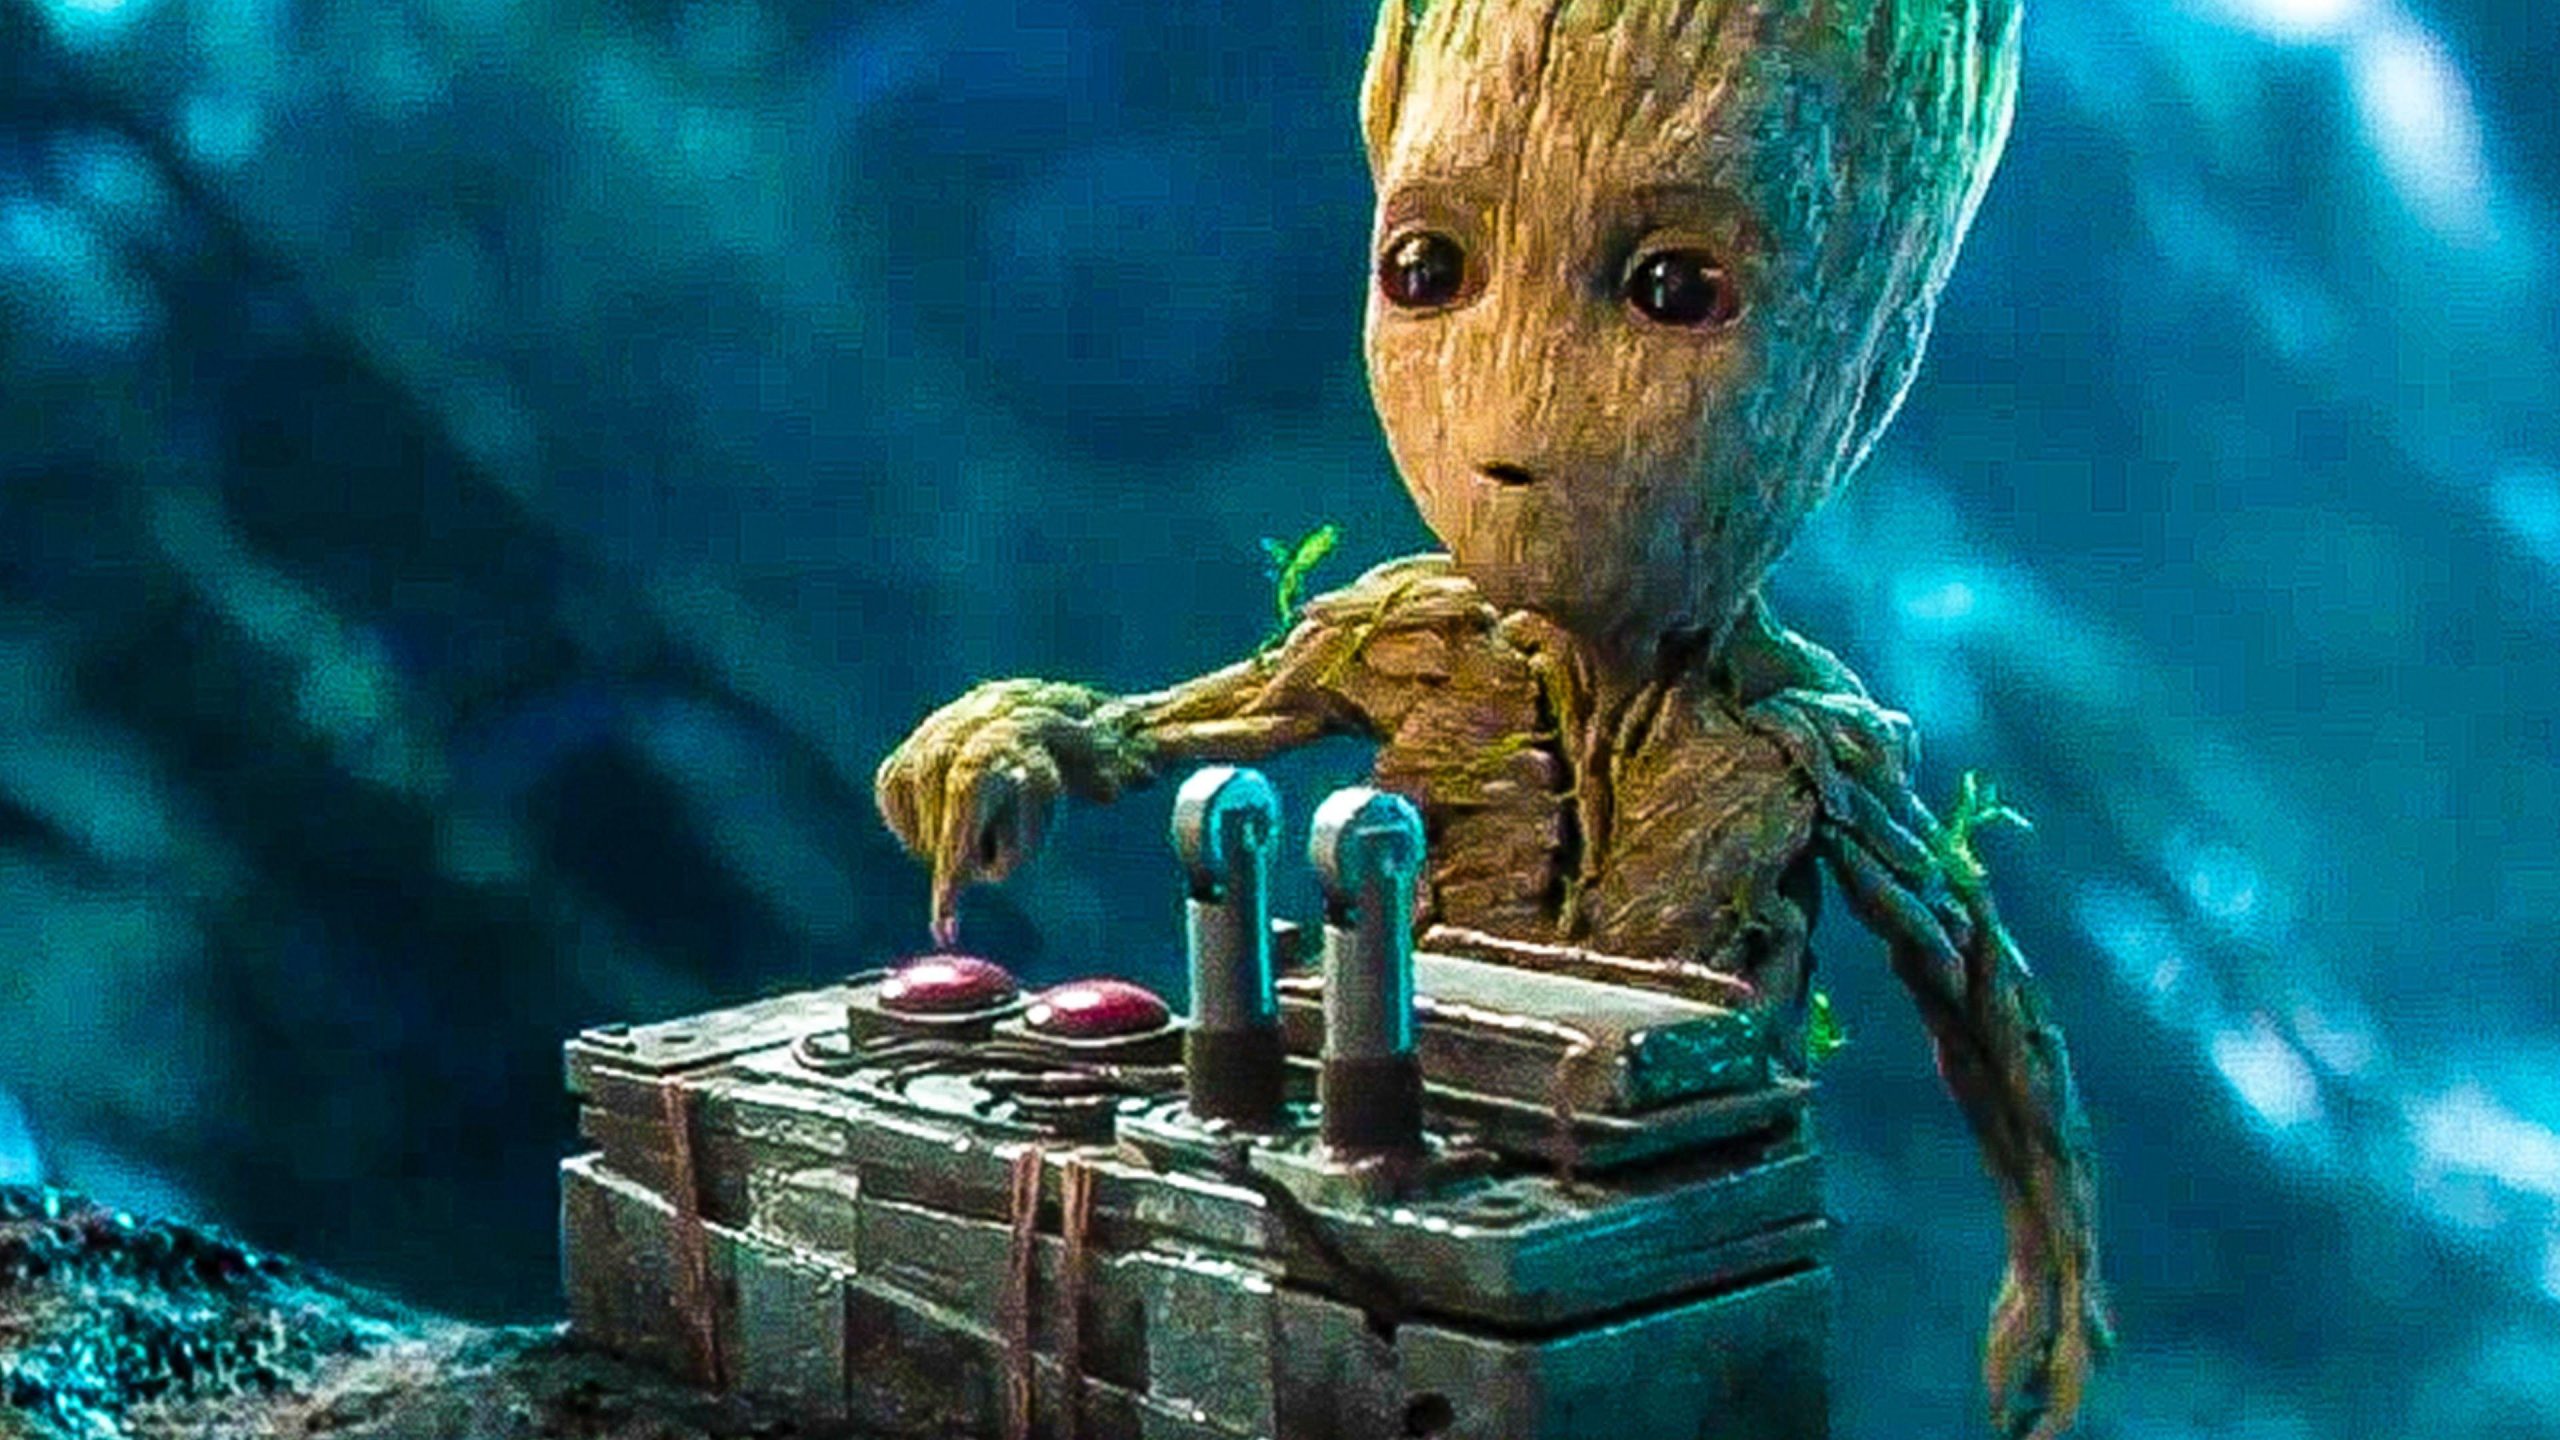 Cute Baby Groot Guardians Of The Galaxy Wallpapers For Free